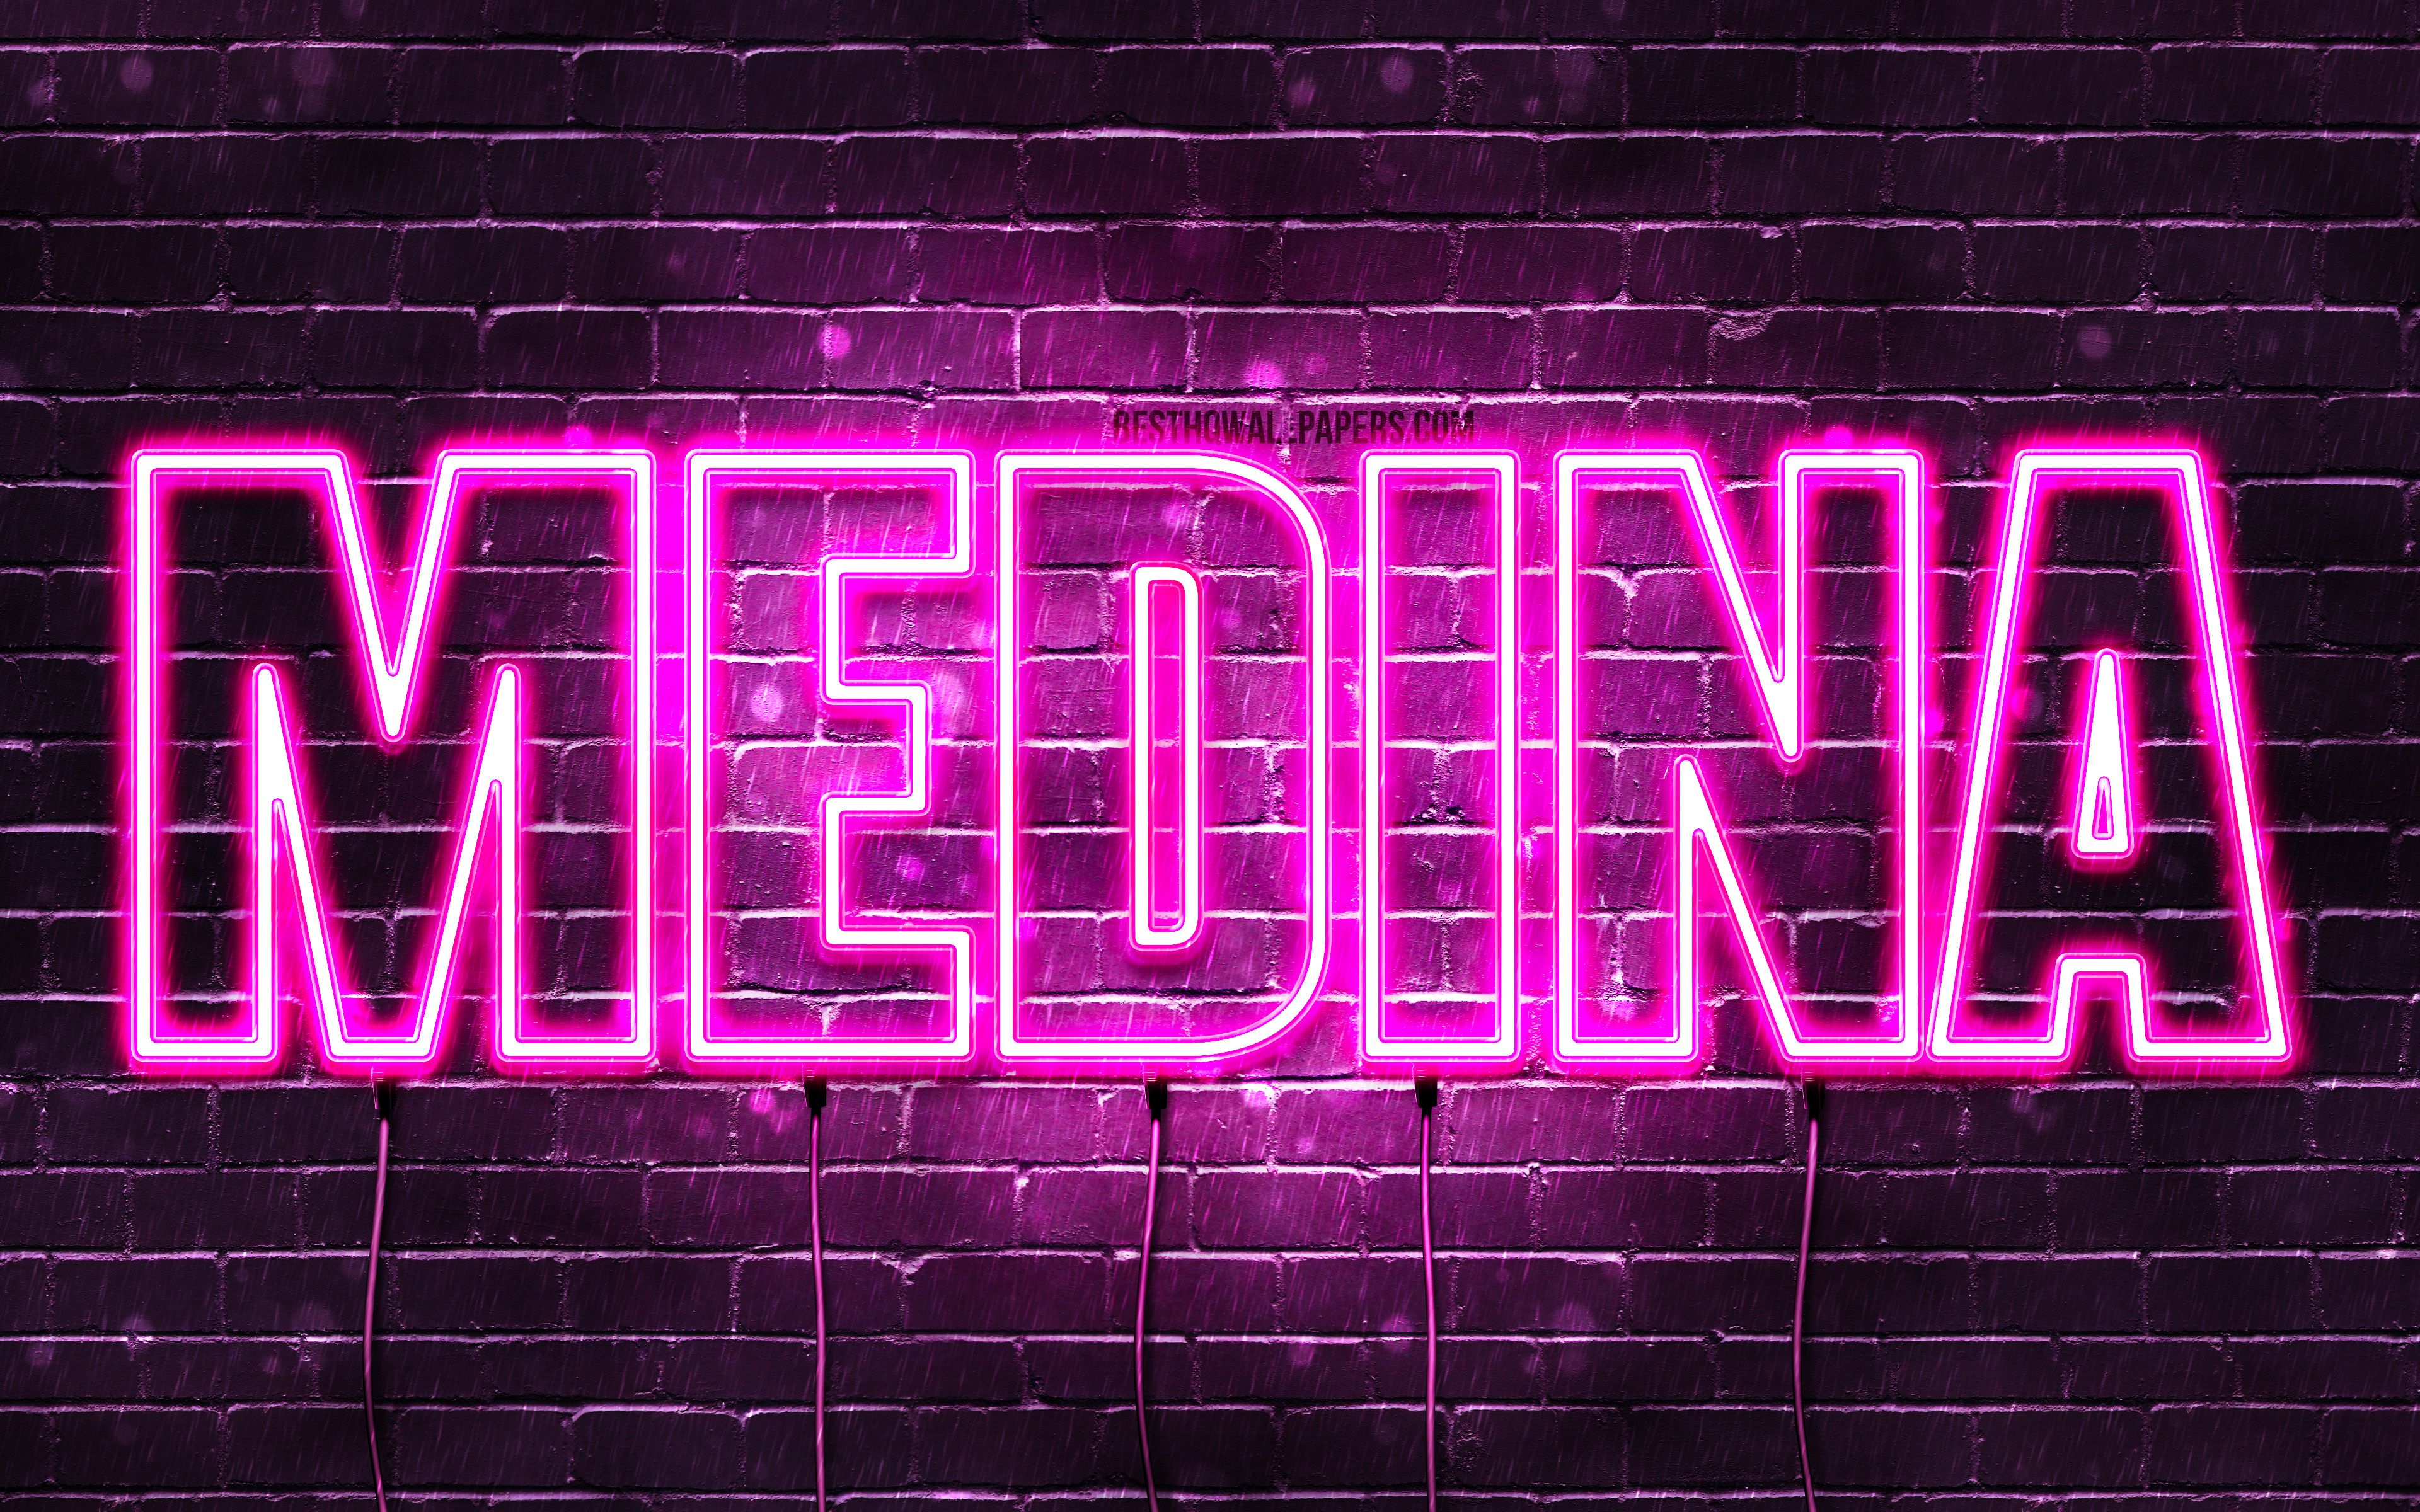 Download wallpaper Medina, 4k, wallpaper with names, female names, Medina name, purple neon lights, Happy Birthday Medina, popular kazakh female names, picture with Medina name for desktop with resolution 3840x2400. High Quality